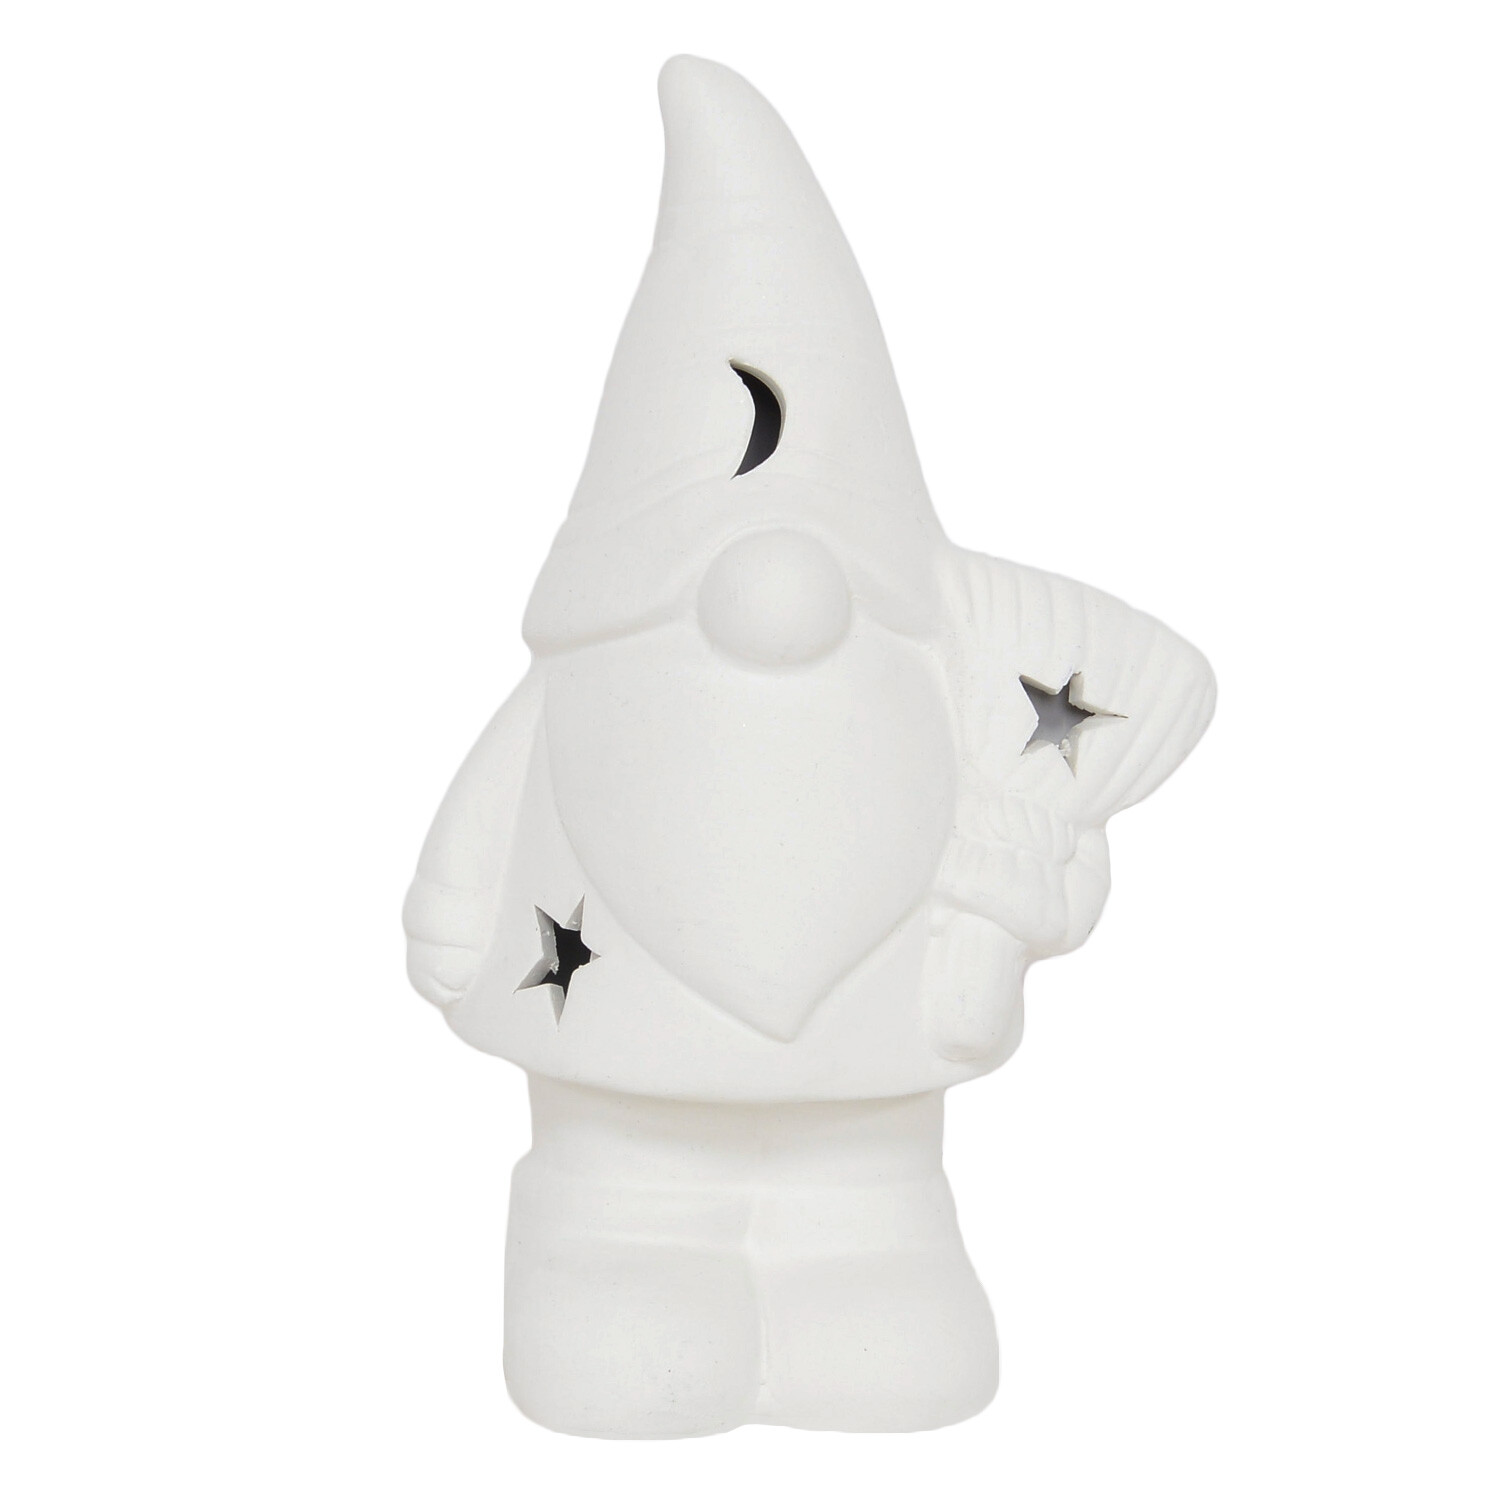 Halloween Paint Your Own Ceramic Light Up Gonk - White Image 1